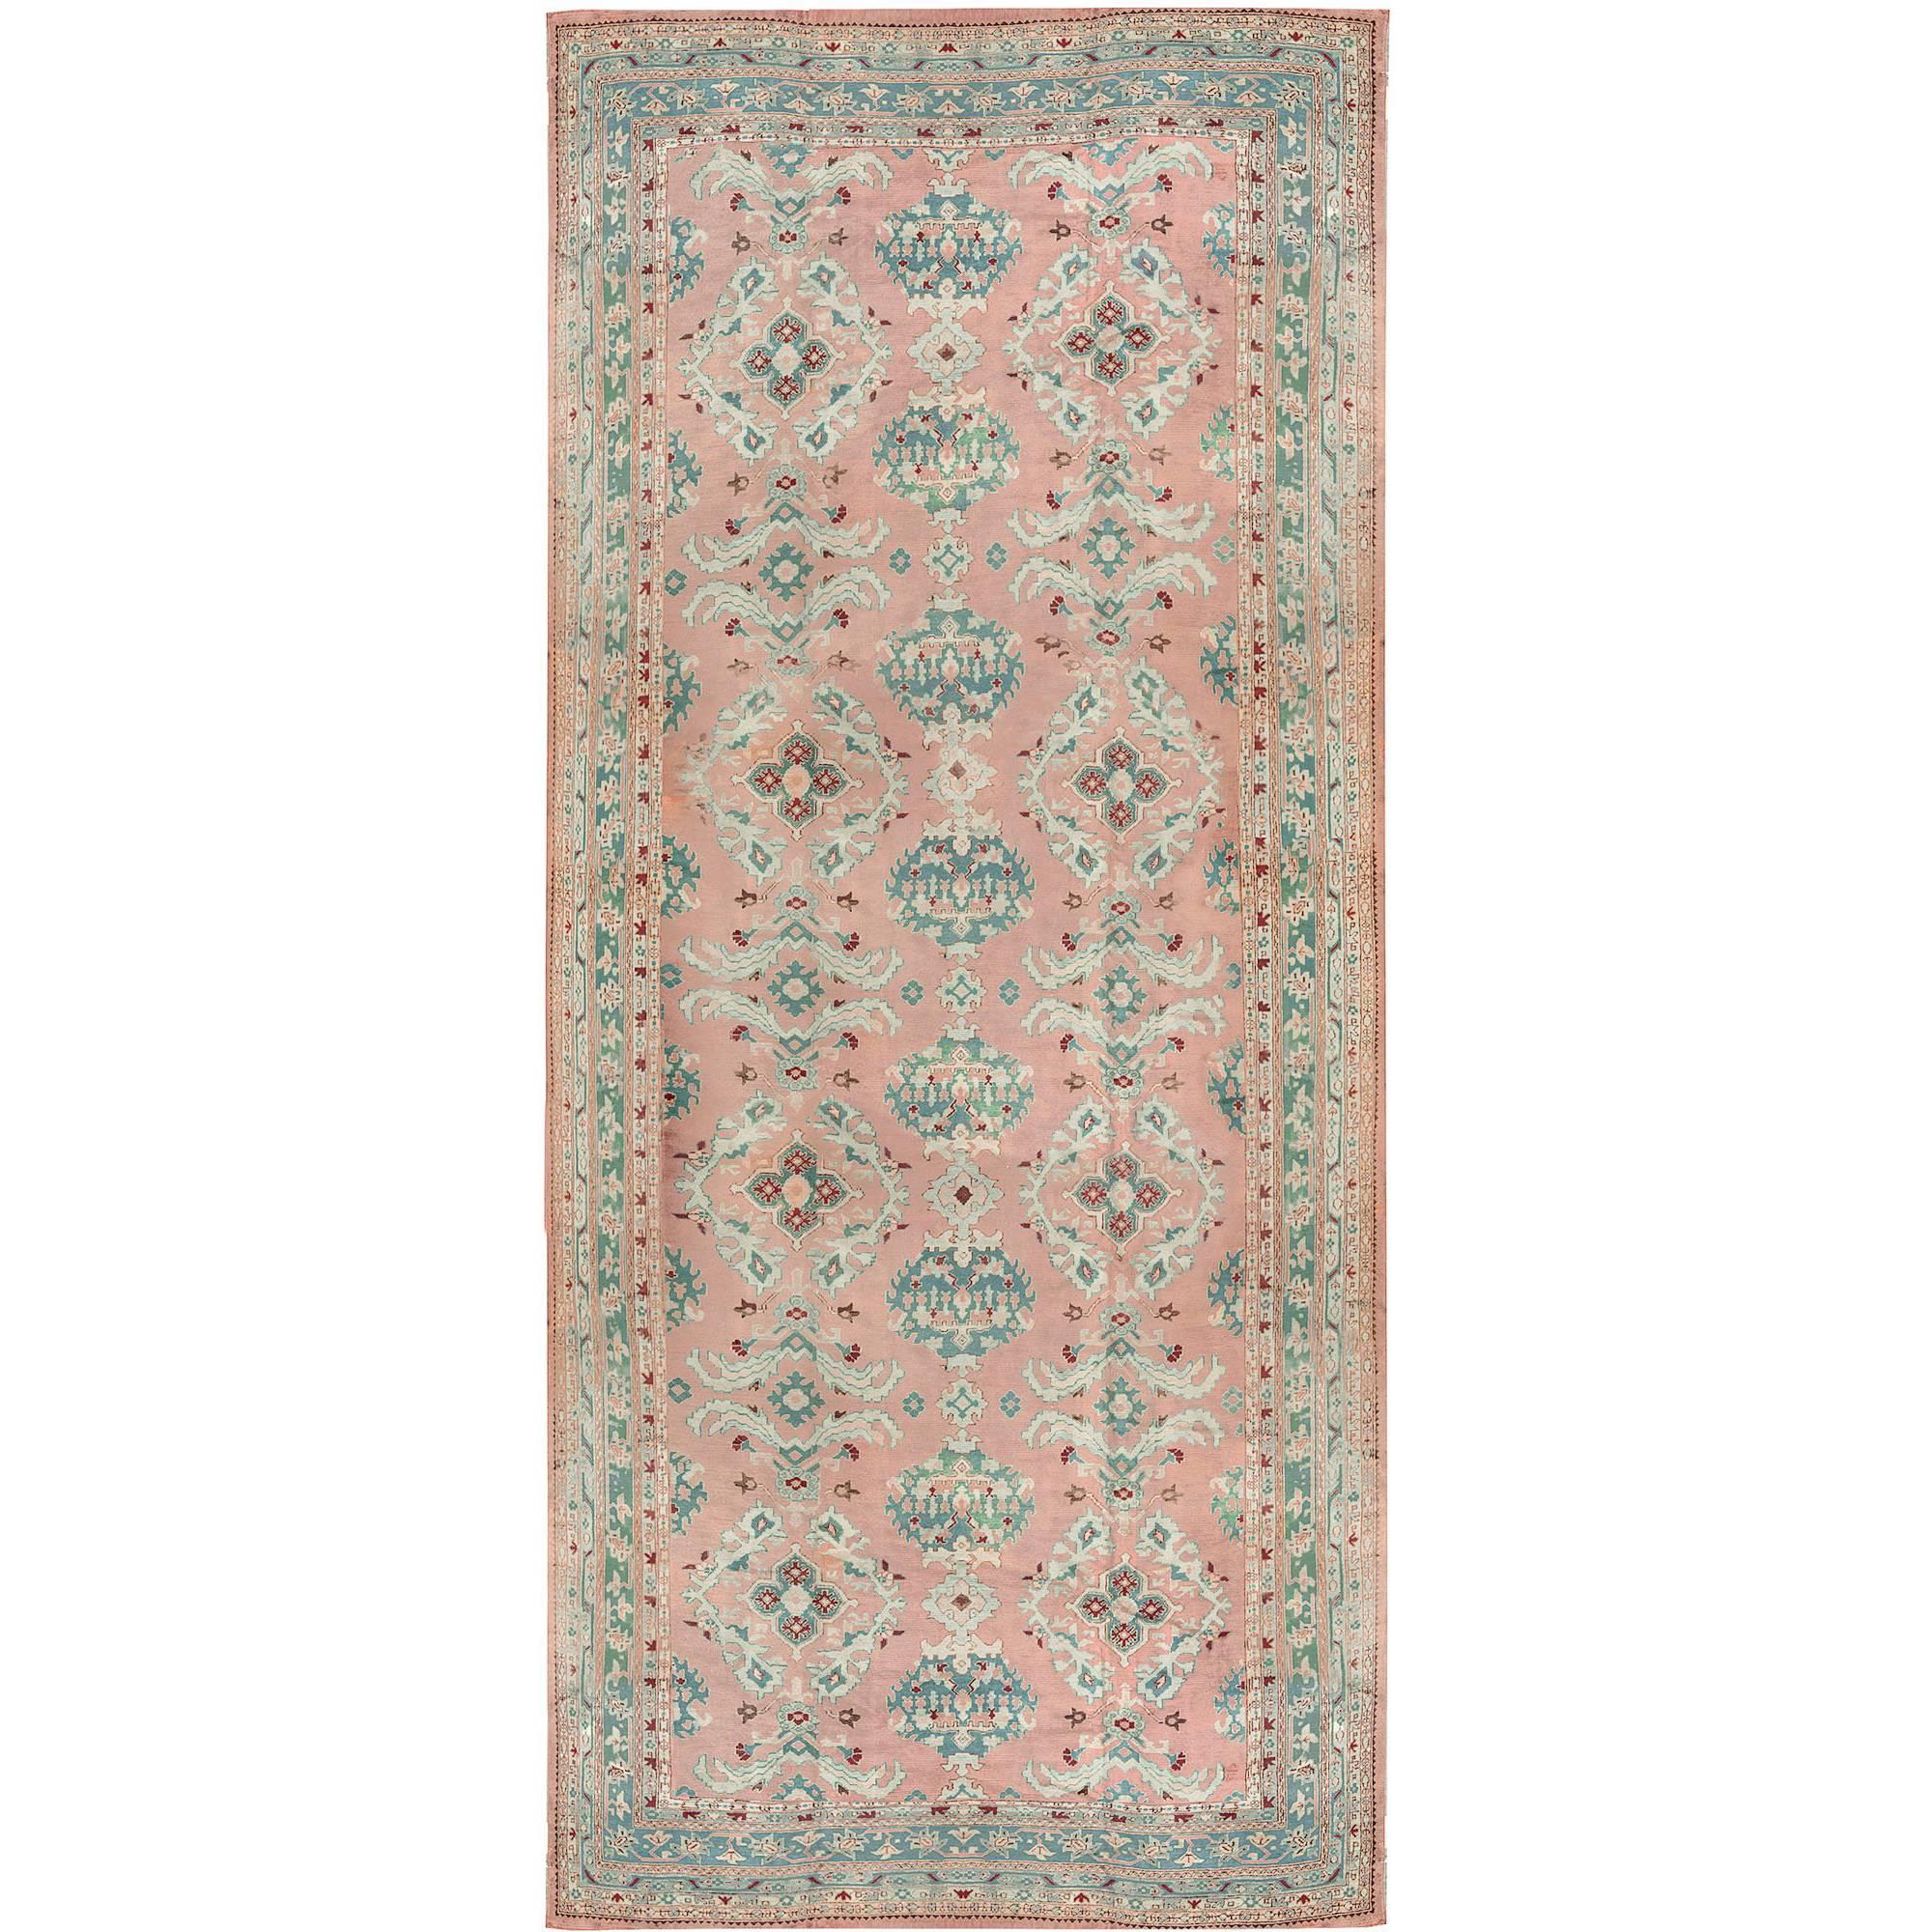 Antique Turkish Oushak Handwoven Luxury Wool Rose/Green Rug 12'-6" X 27' Size For Sale